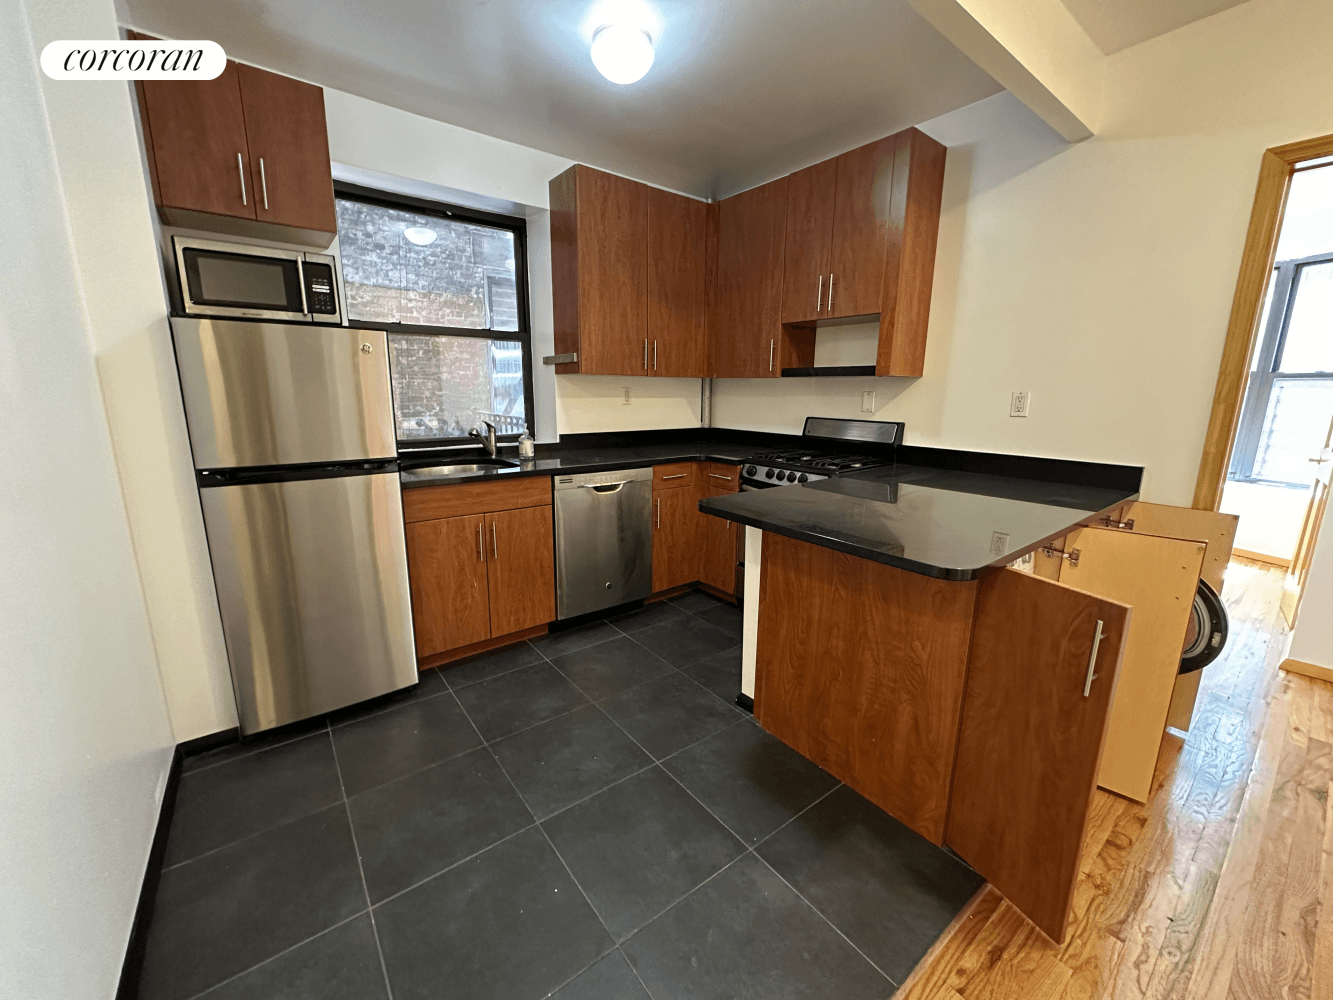 Wonderfully Located 3 BedroomPrime location with easy access to 1 and AC trainsEnjoy the convenience of a washer dryer and dishwasher in unitBright bedrooms feature ample closet space for all ...